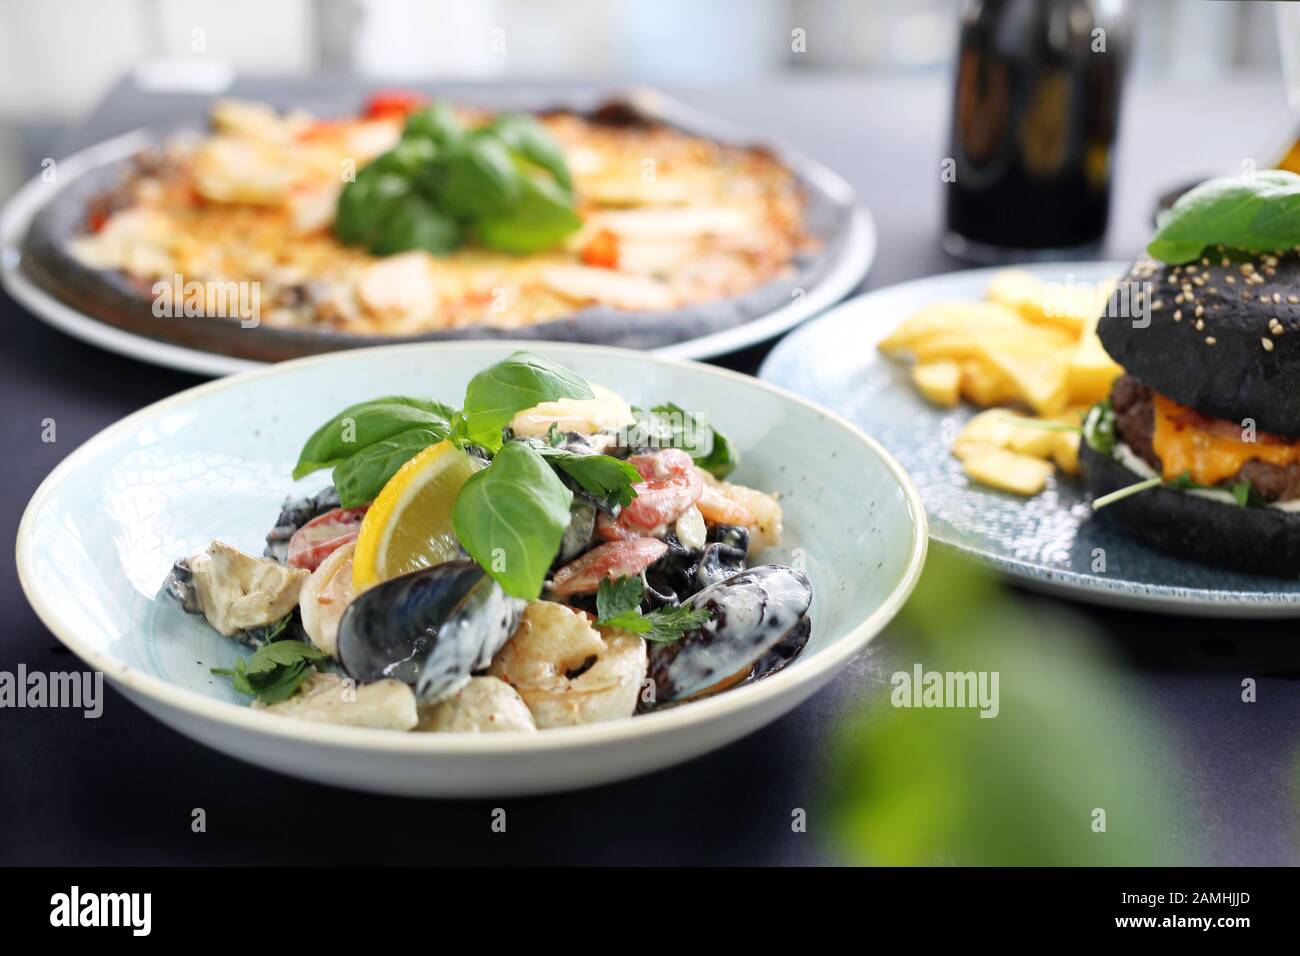 Black food. Burger, pizza, pasta, dishes with activated charcoal. Stock Photo